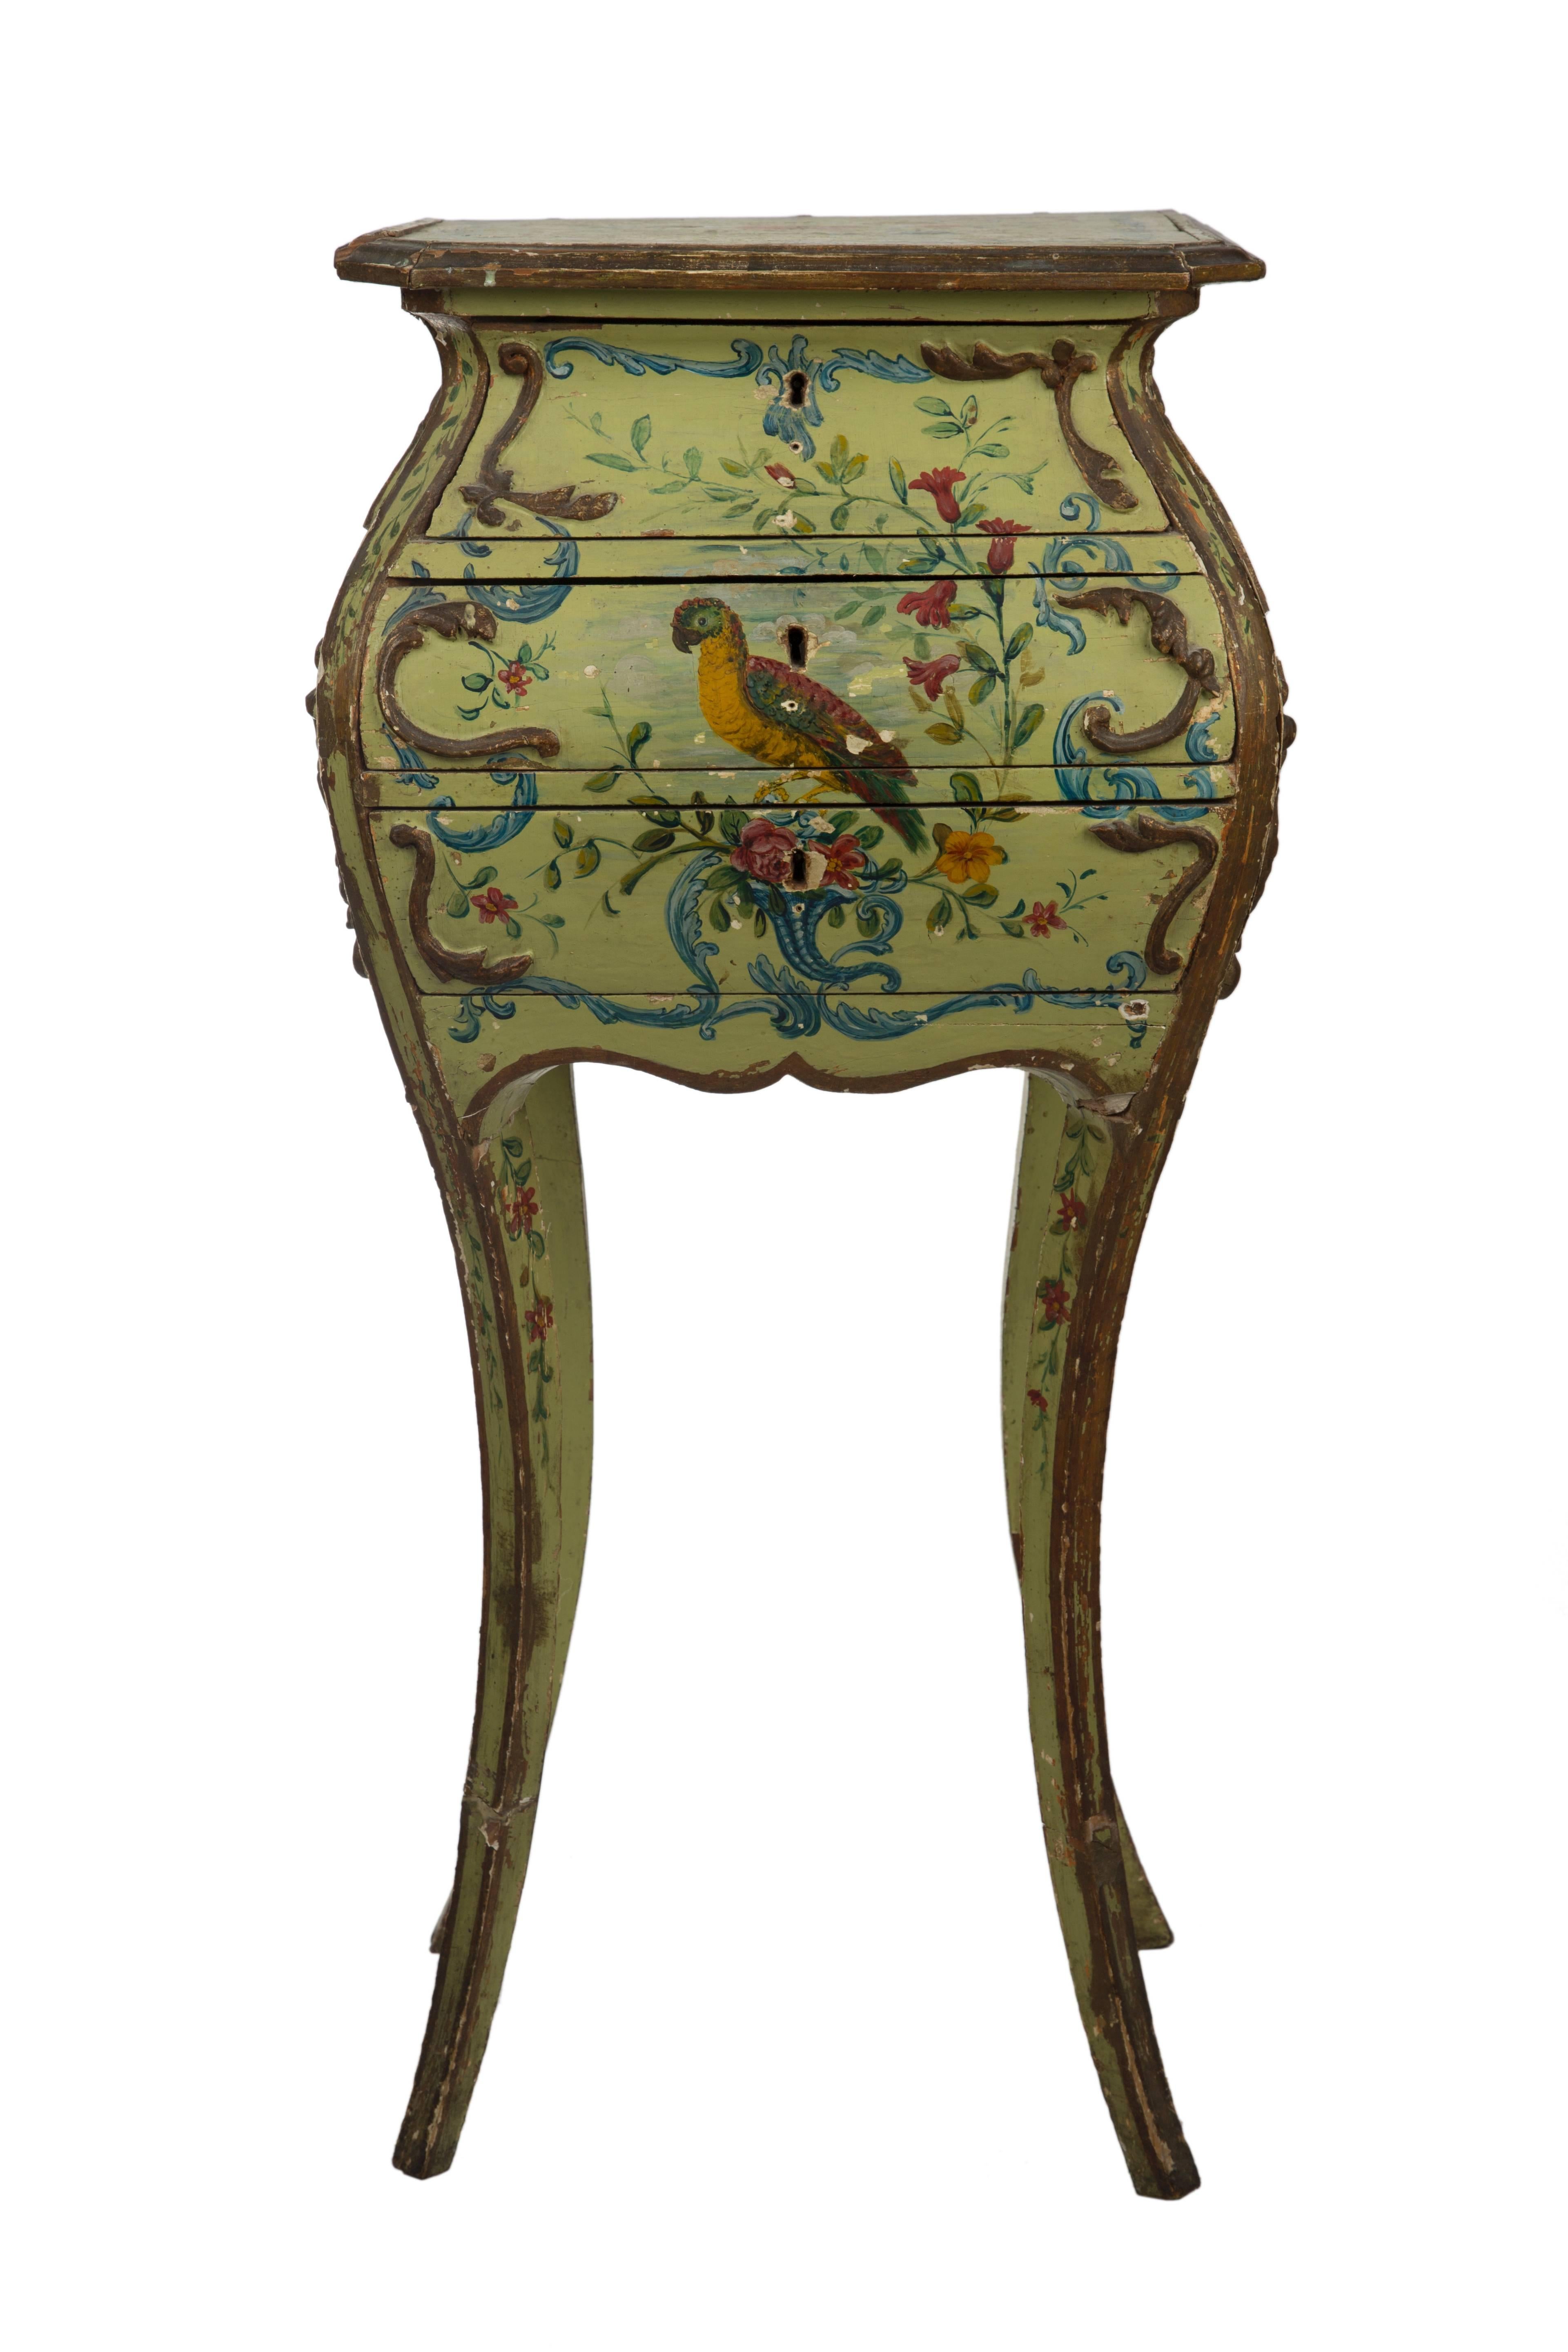 Venetian wood lacca povera three-drawer table, embellished with parrot surrounded within beautiful colorful floral motif.
Italian, 18th century.